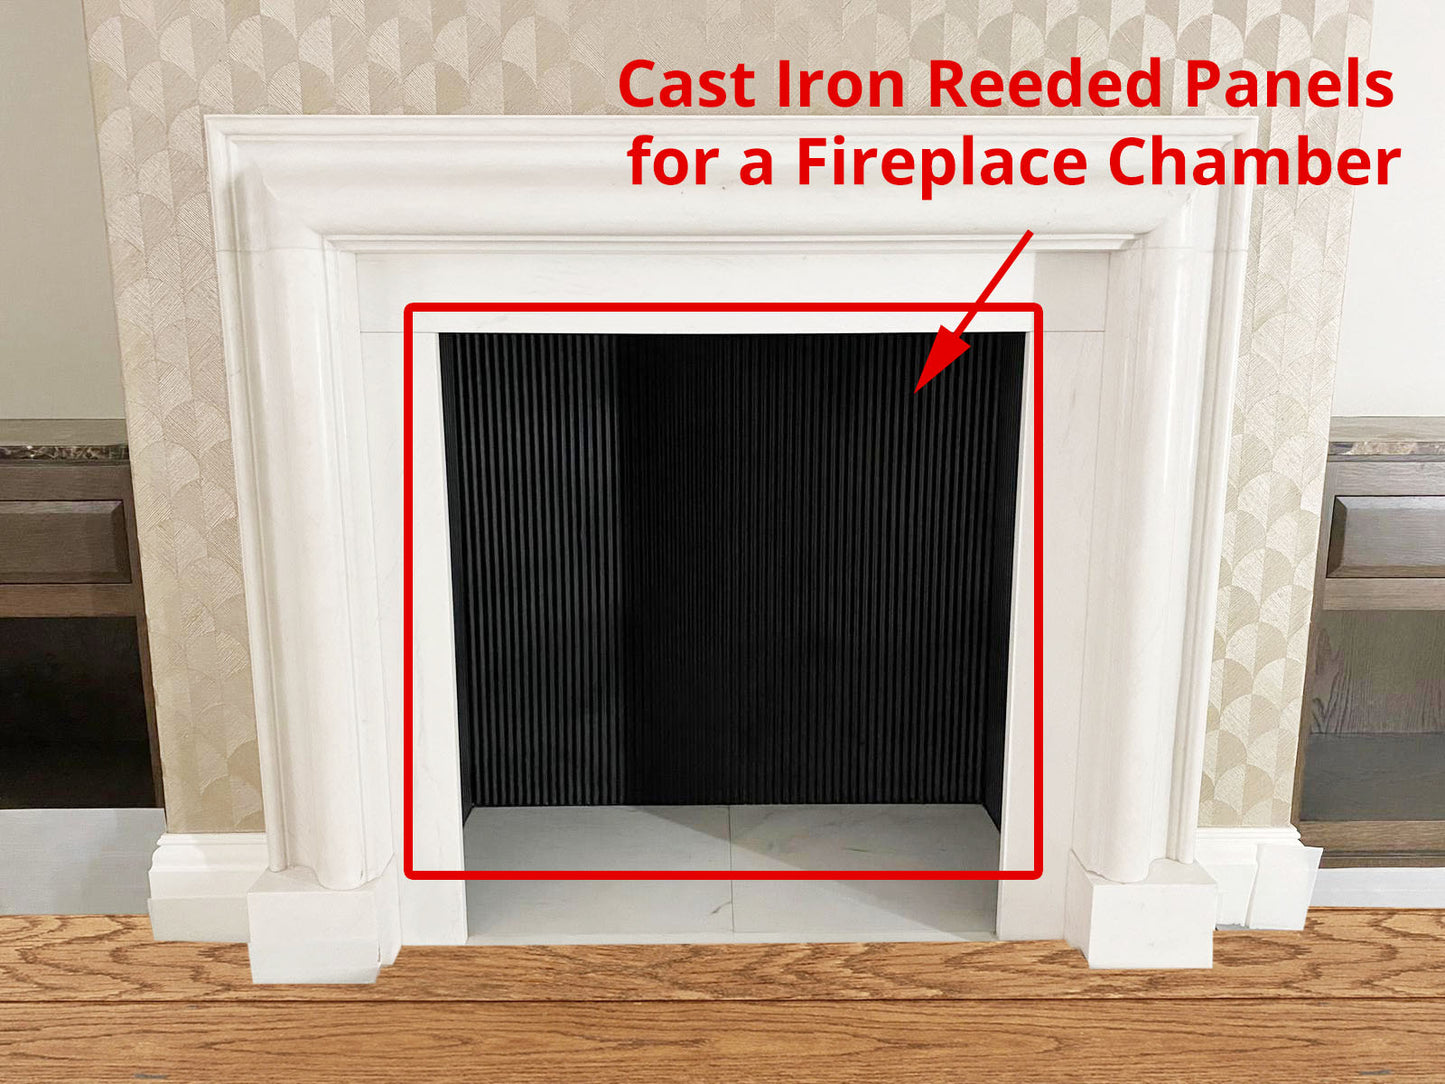 Cast Iron Reeded Panels